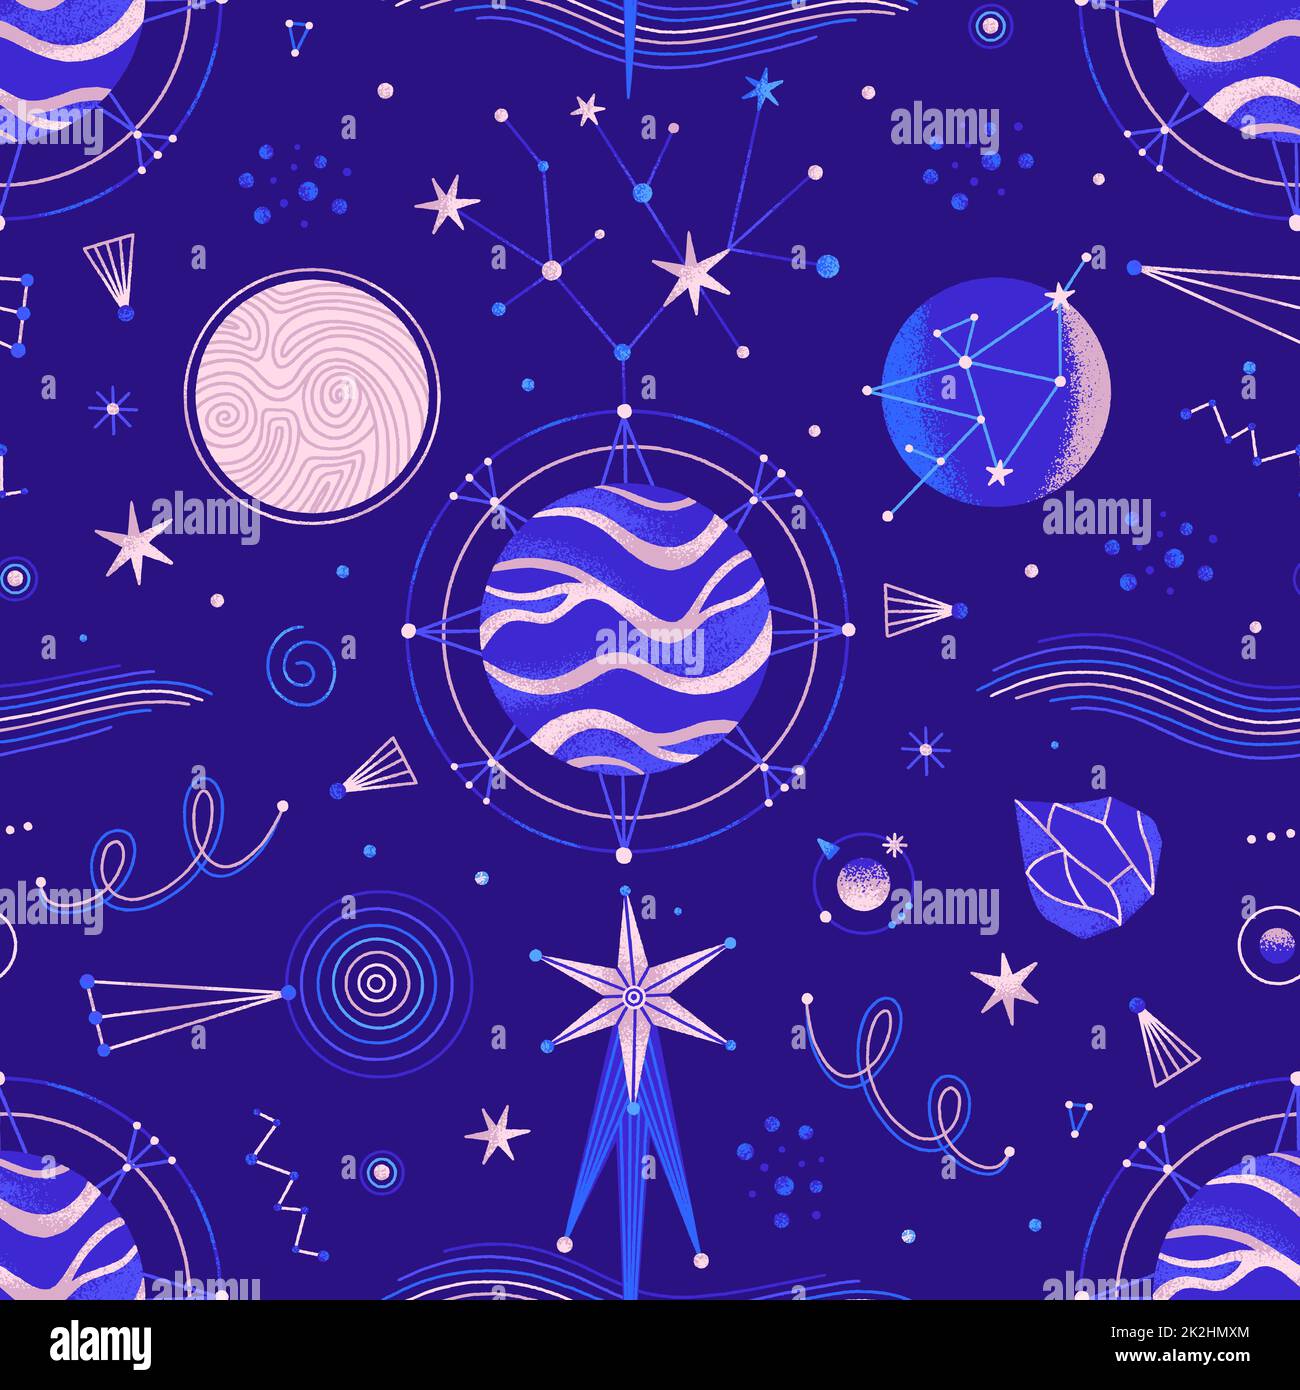 Mysterious space seamless patterns of planets, stars, other celestial bodies Stock Photo